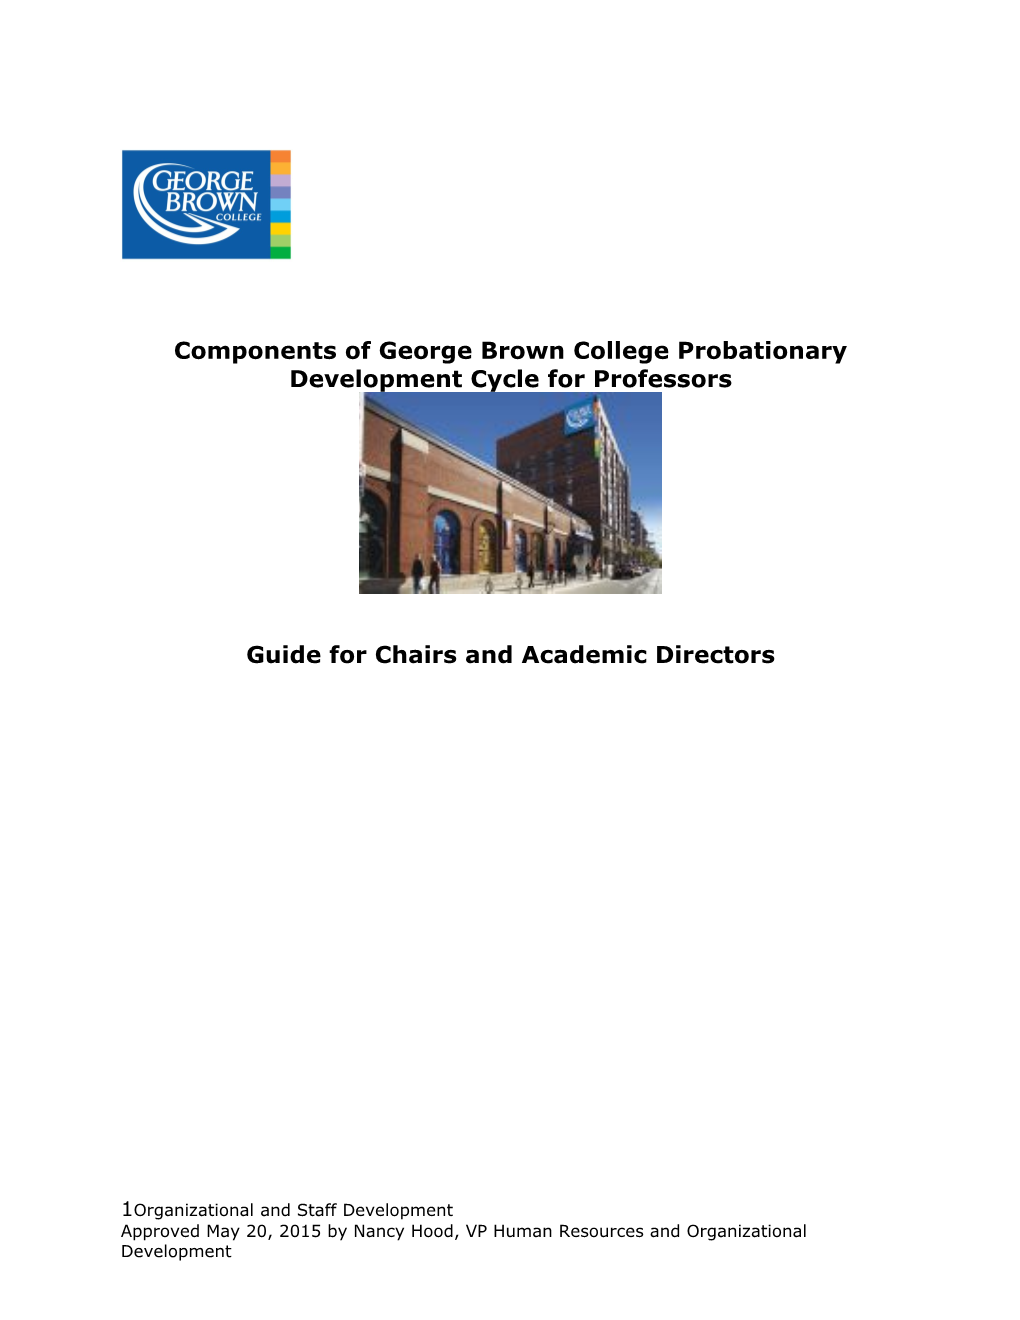 Components of George Brown College Probationary Development Cycle for Professors